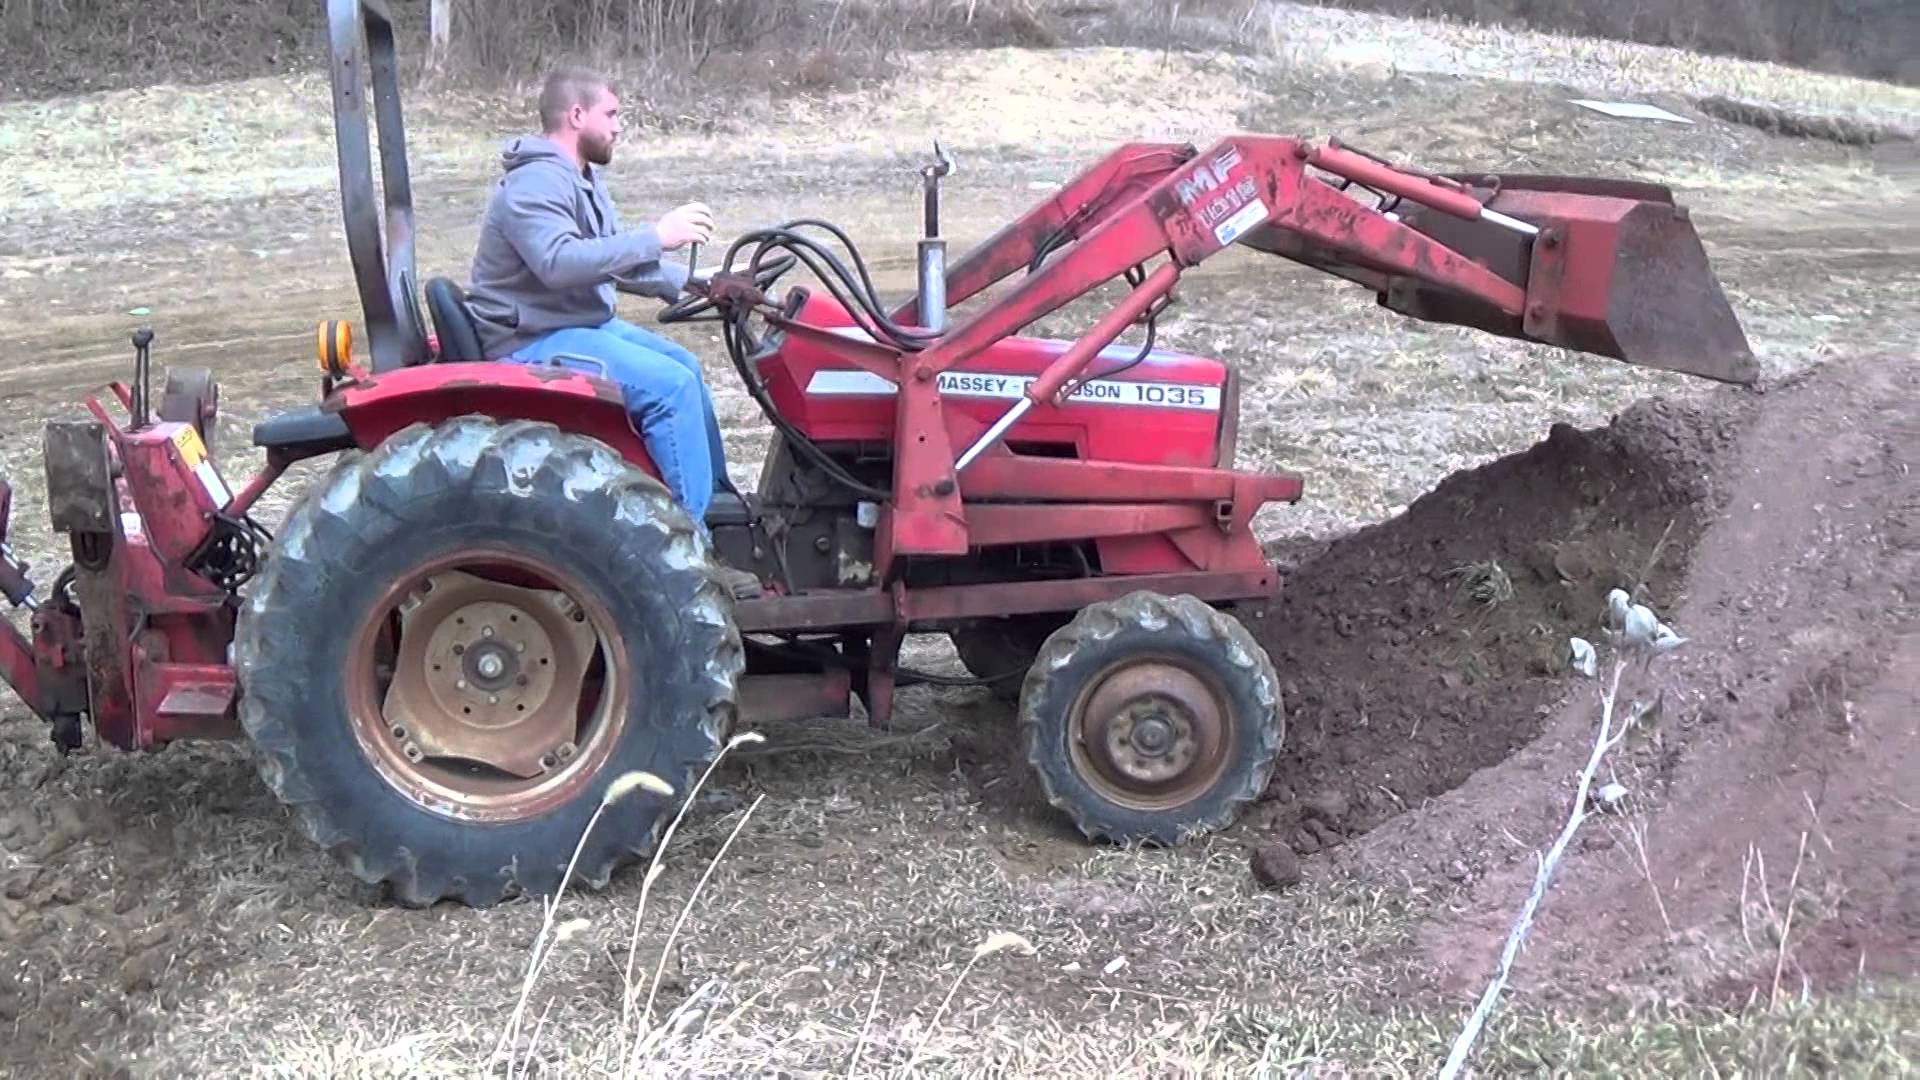 Massey Ferguson 1035 4wd with loader and backhoe - YouTube